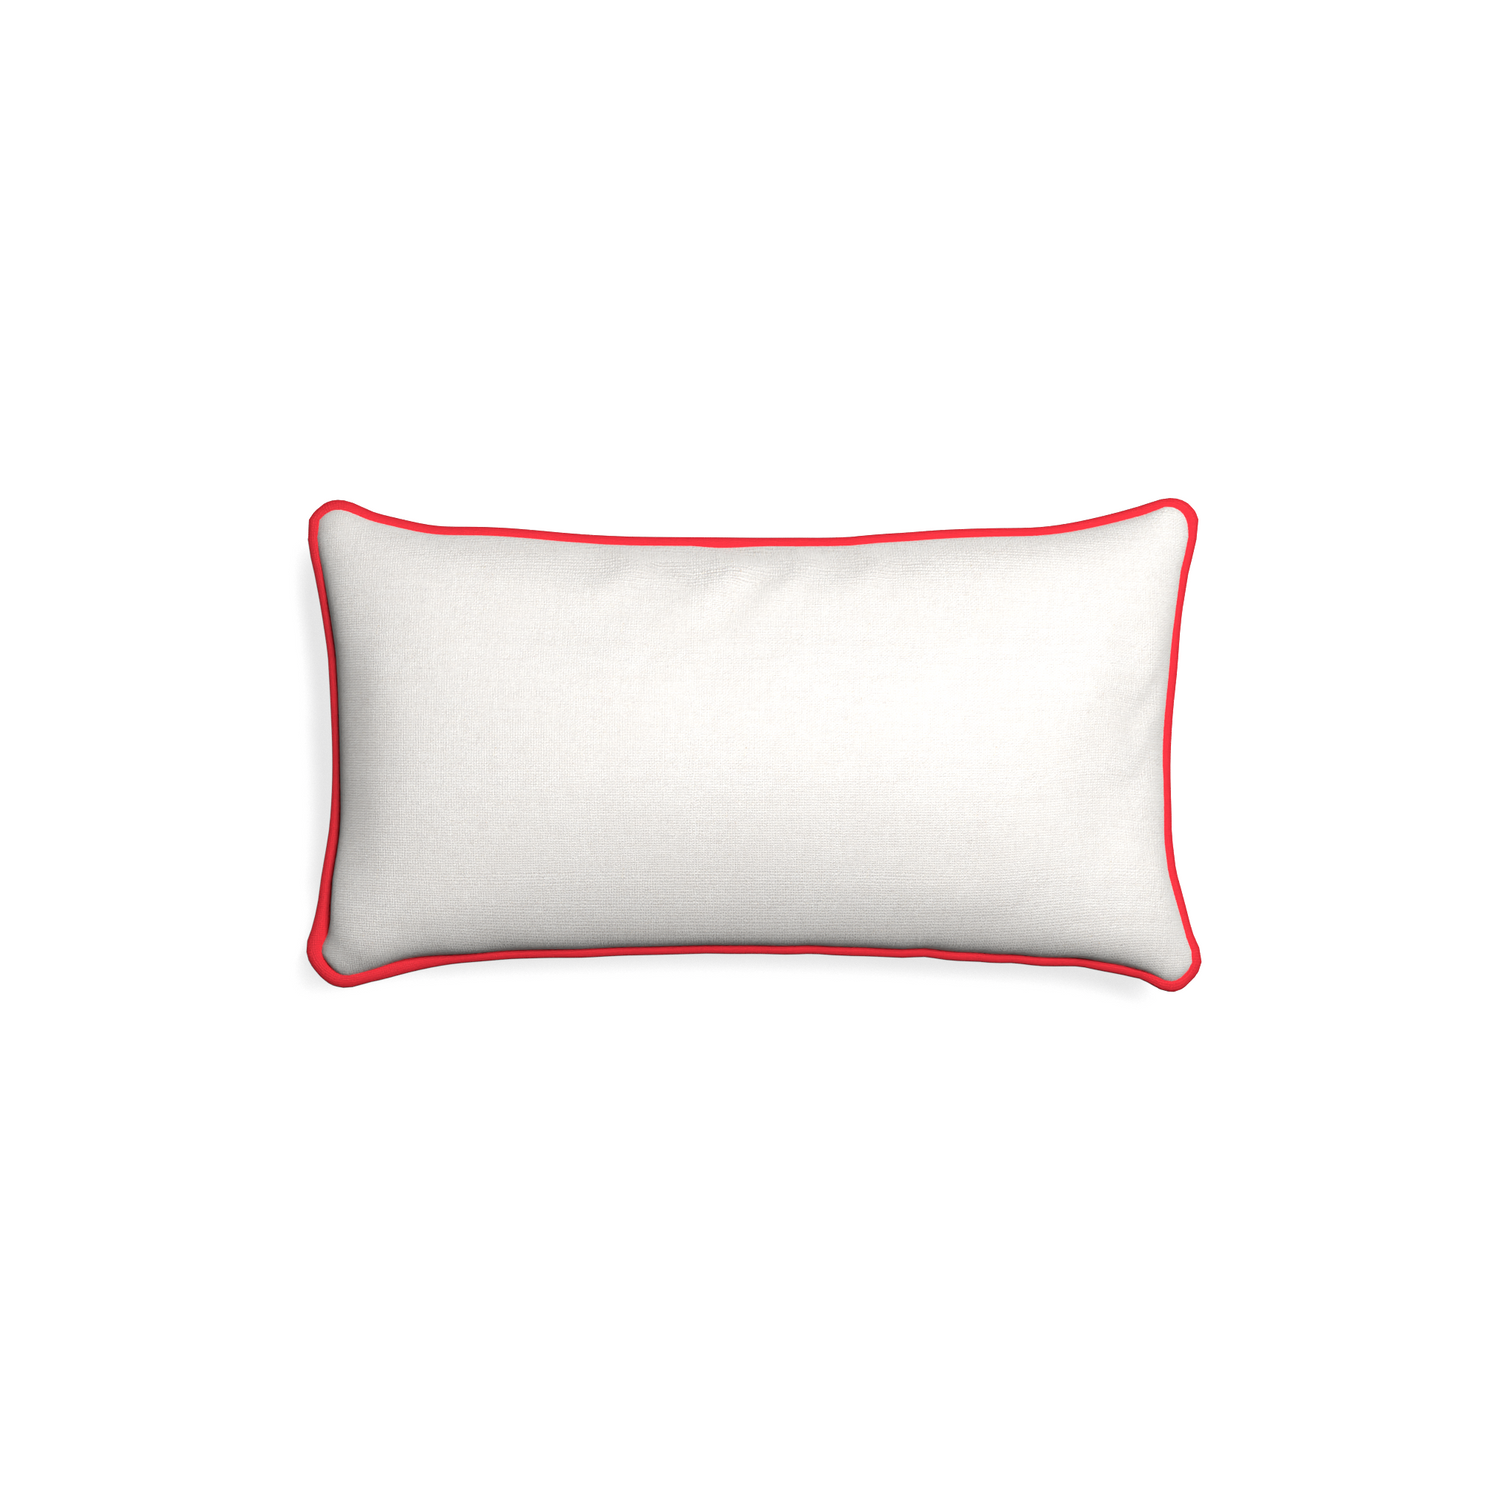 Petite-lumbar flour custom natural whitepillow with cherry piping on white background